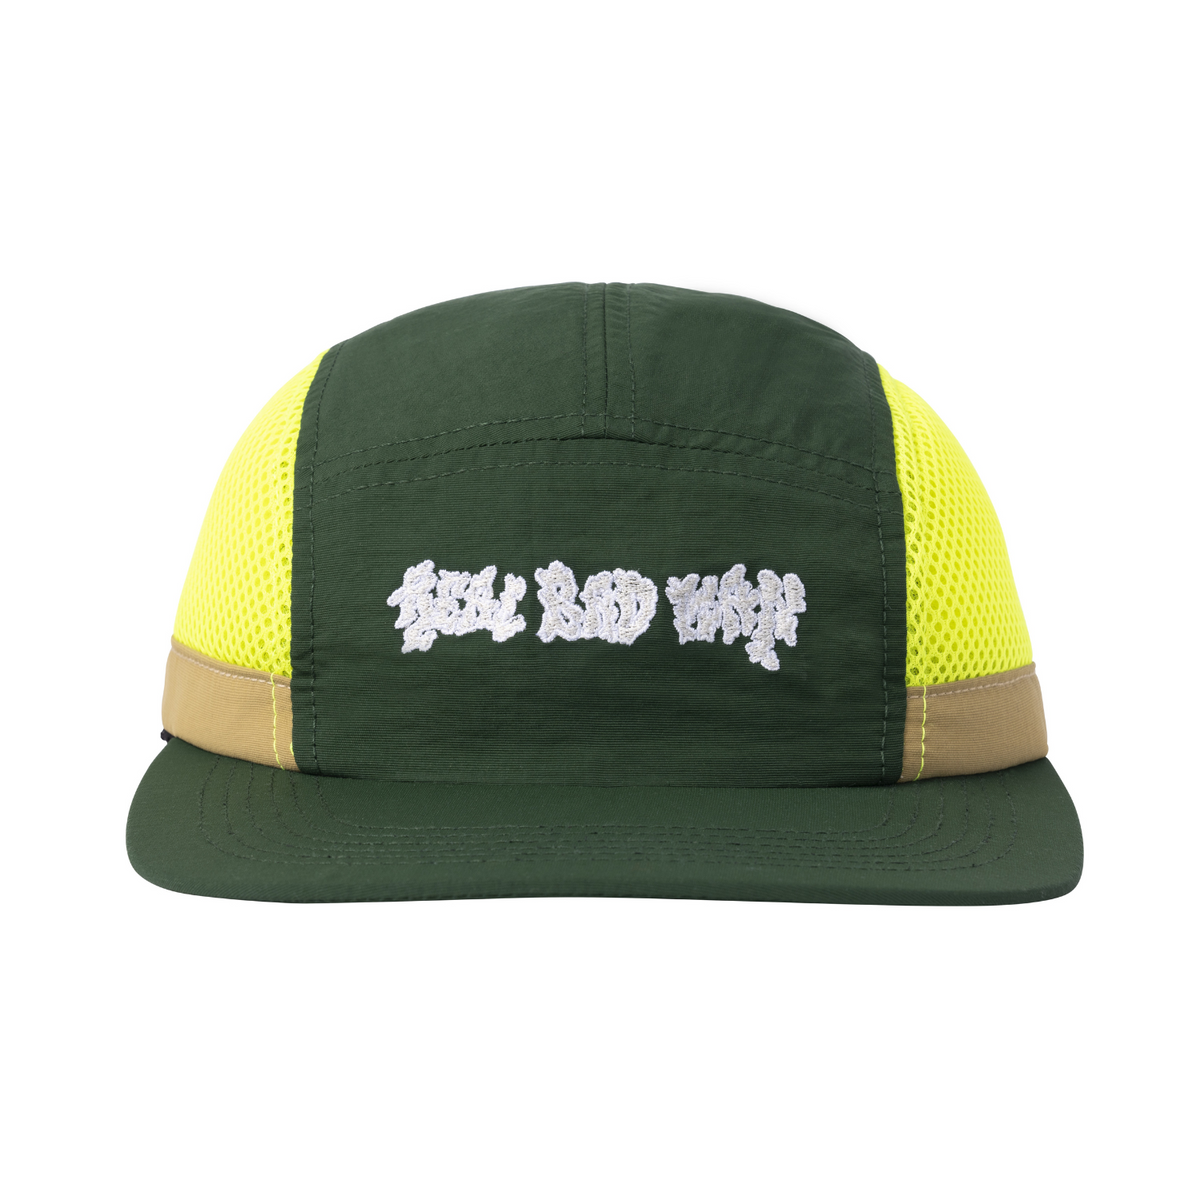 WILD RECORD HIKER CAP - FOREST LAWN